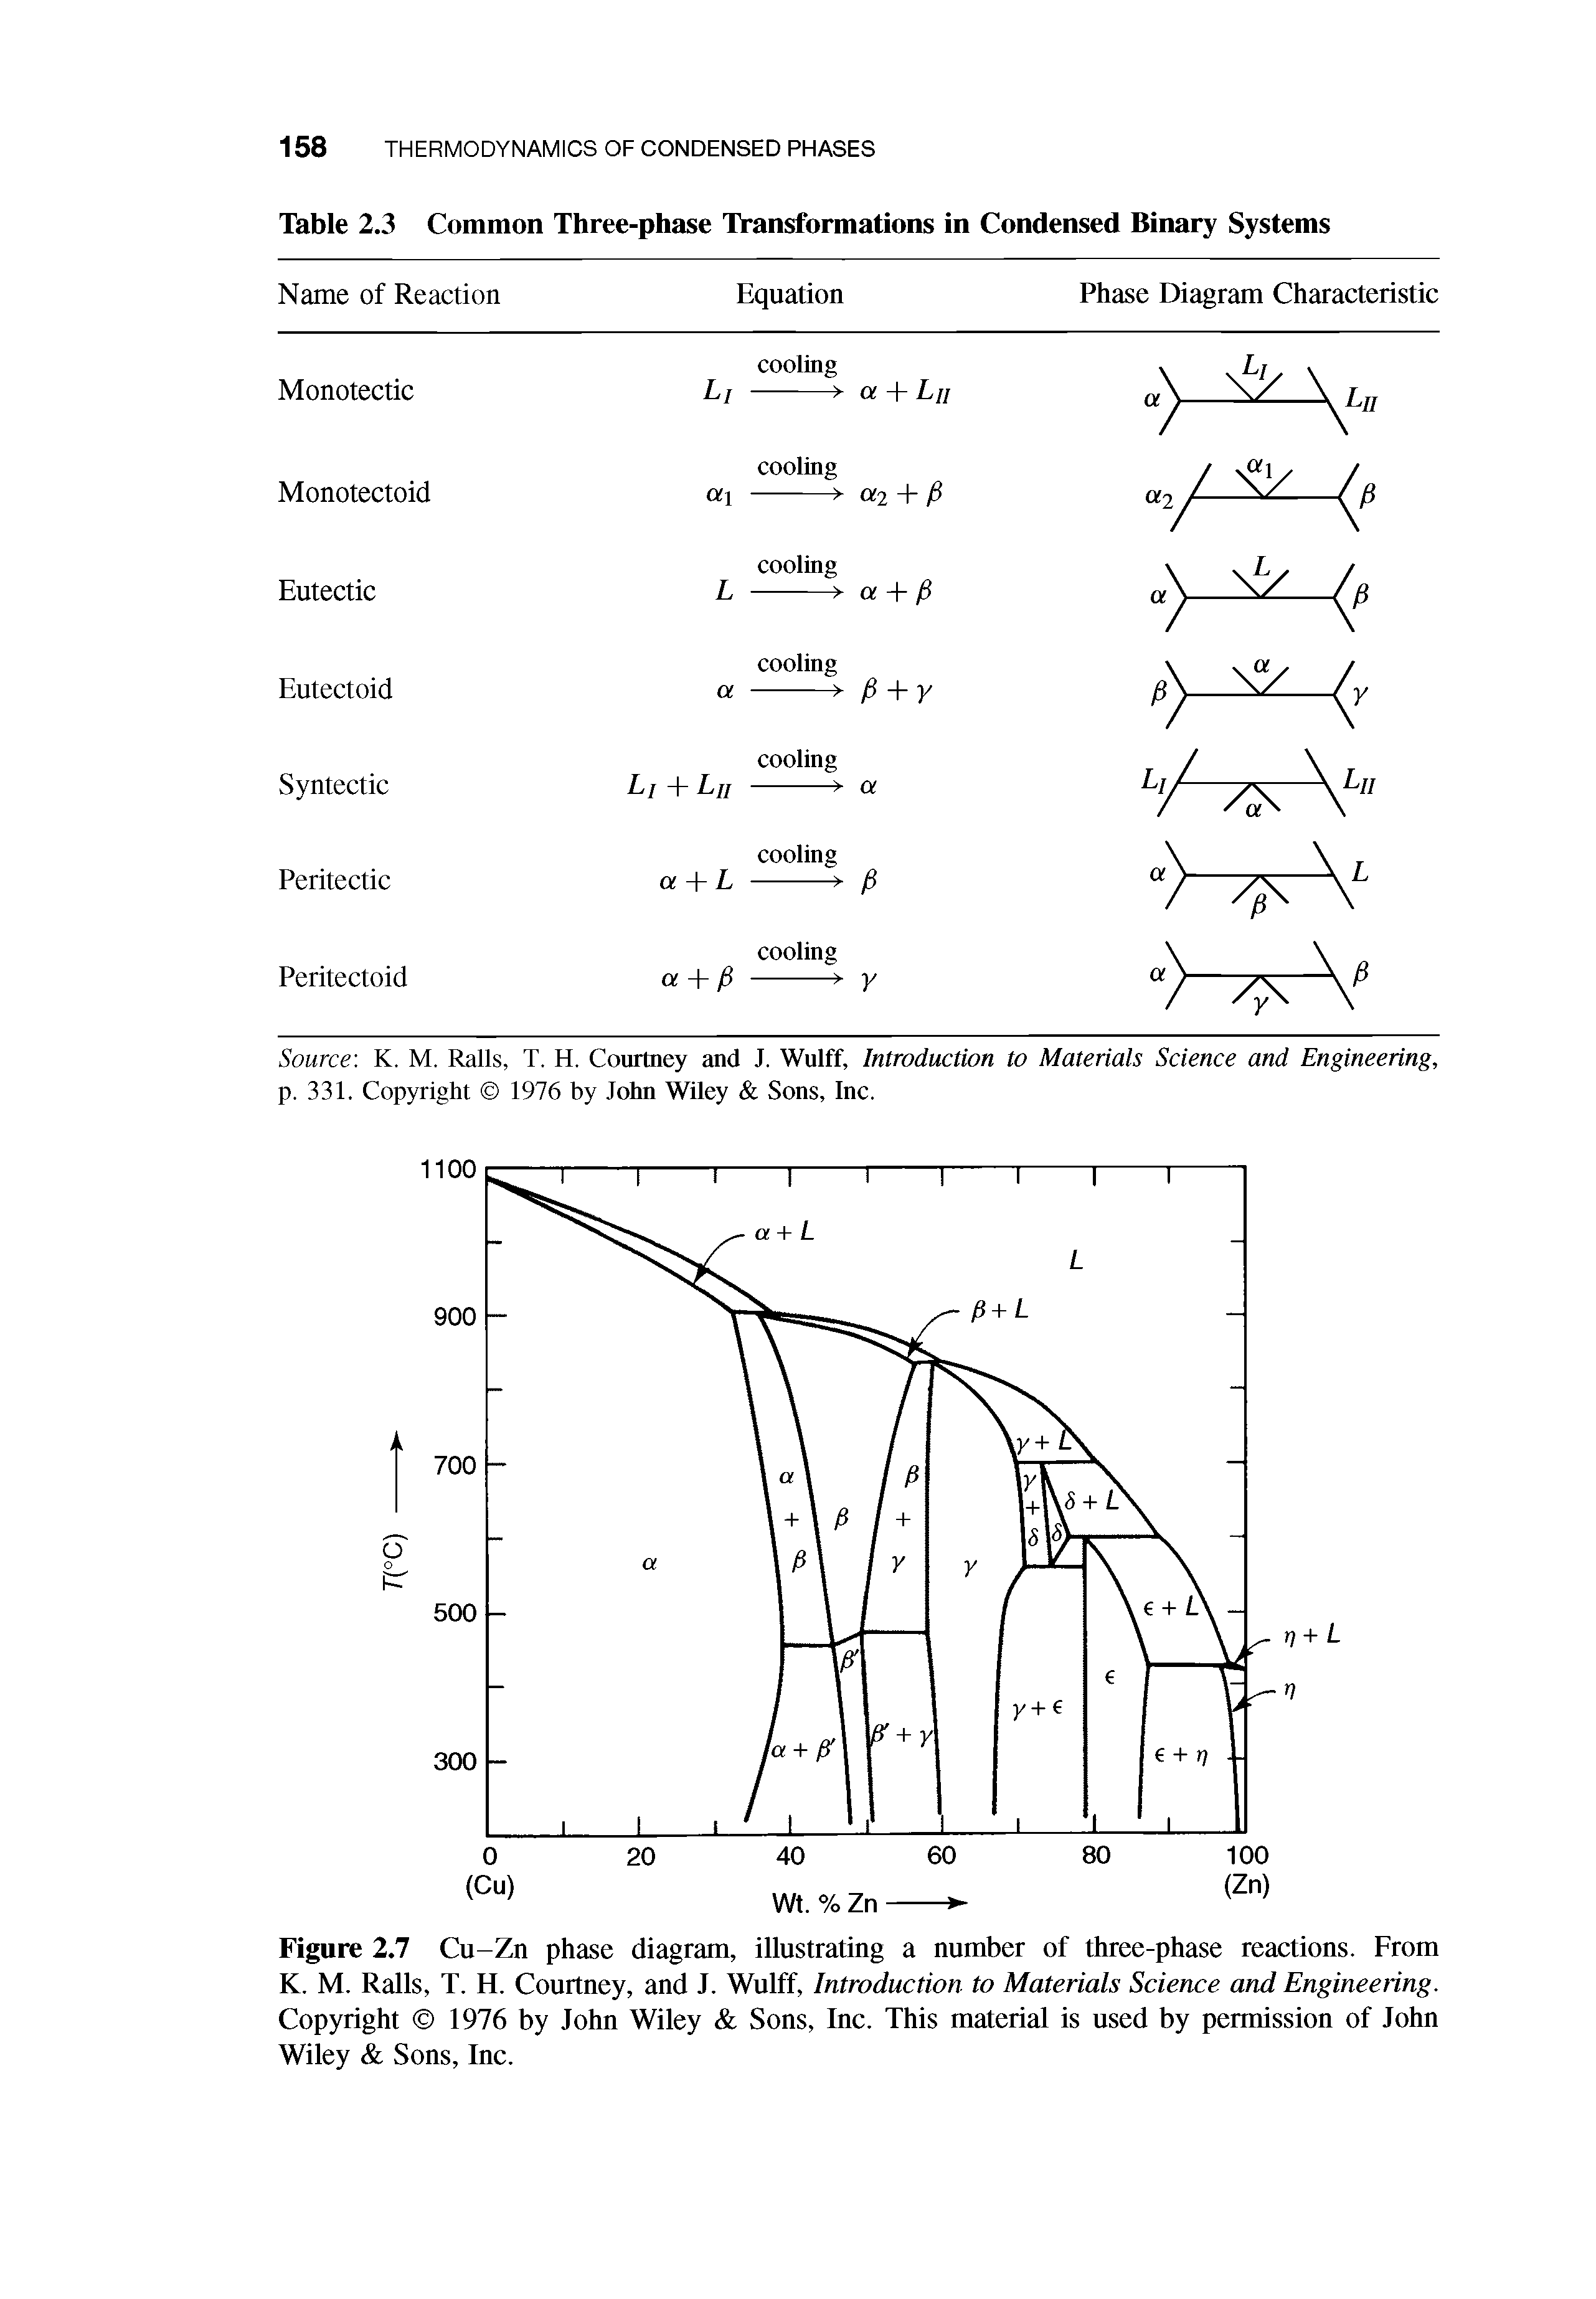 Figure 2.7 Cu-Zn phase diagram, illustrating a number of three-phase reactions. From K. M. Ralls, T. H. Courtney, and J. Wulff, Introduction to Materials Science and Engineering. Copyright 1976 by John Wiley Sons, Inc. This material is used by permission of John Wiley Sons, Inc.